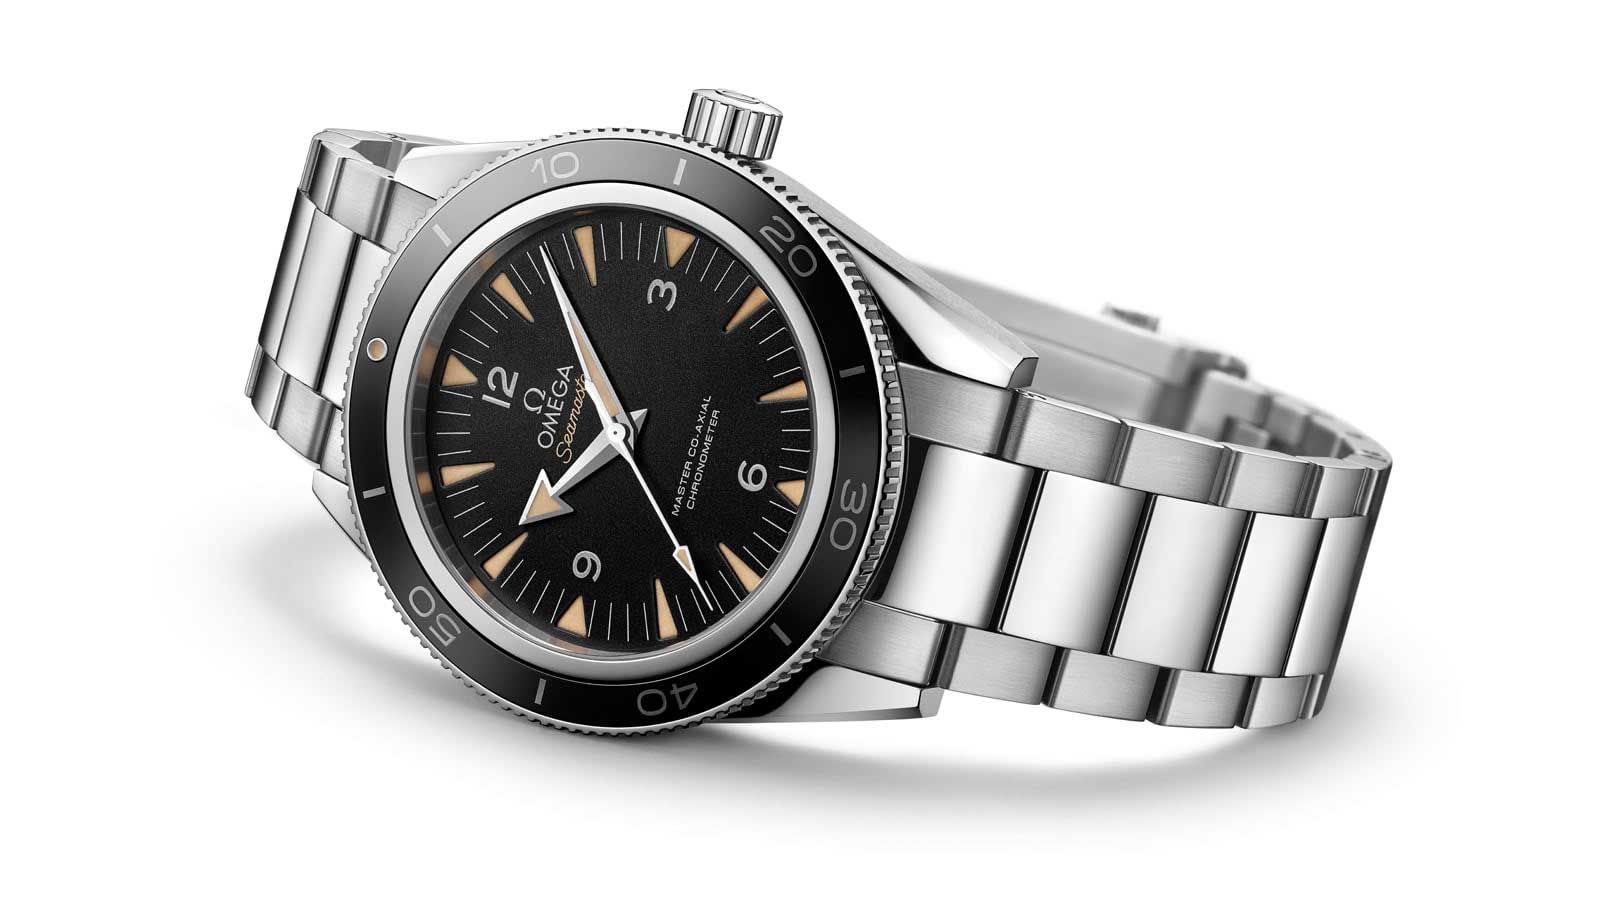 THE SEAMASTER 300 MASTER CO-AXIAL画像